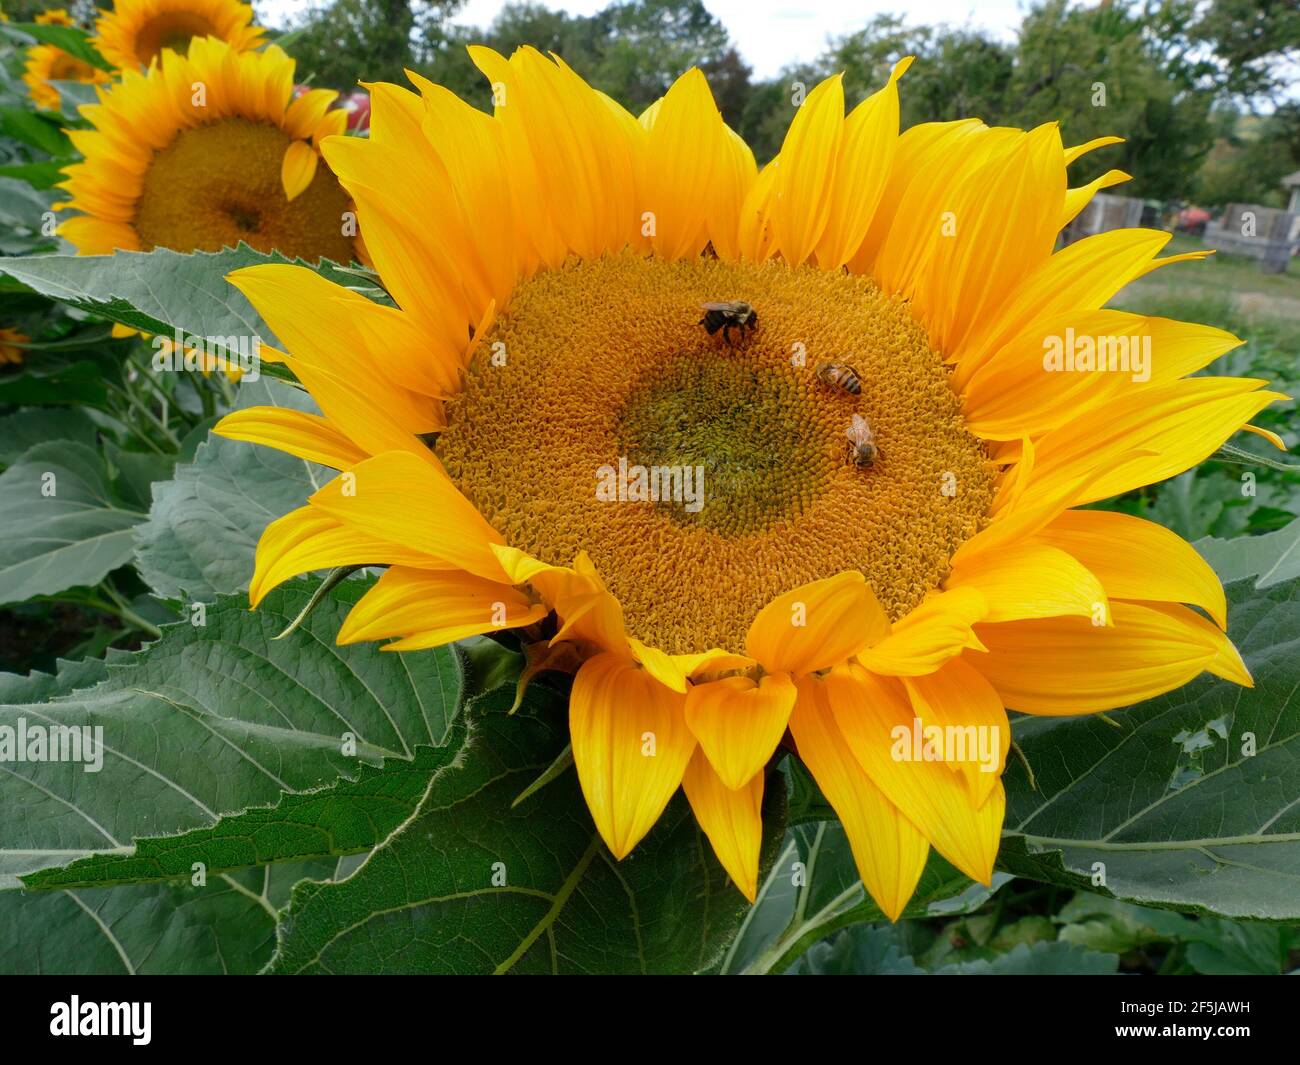 One Bumblebee and Two Honeybees on a Giant Sunflower Stock Photo